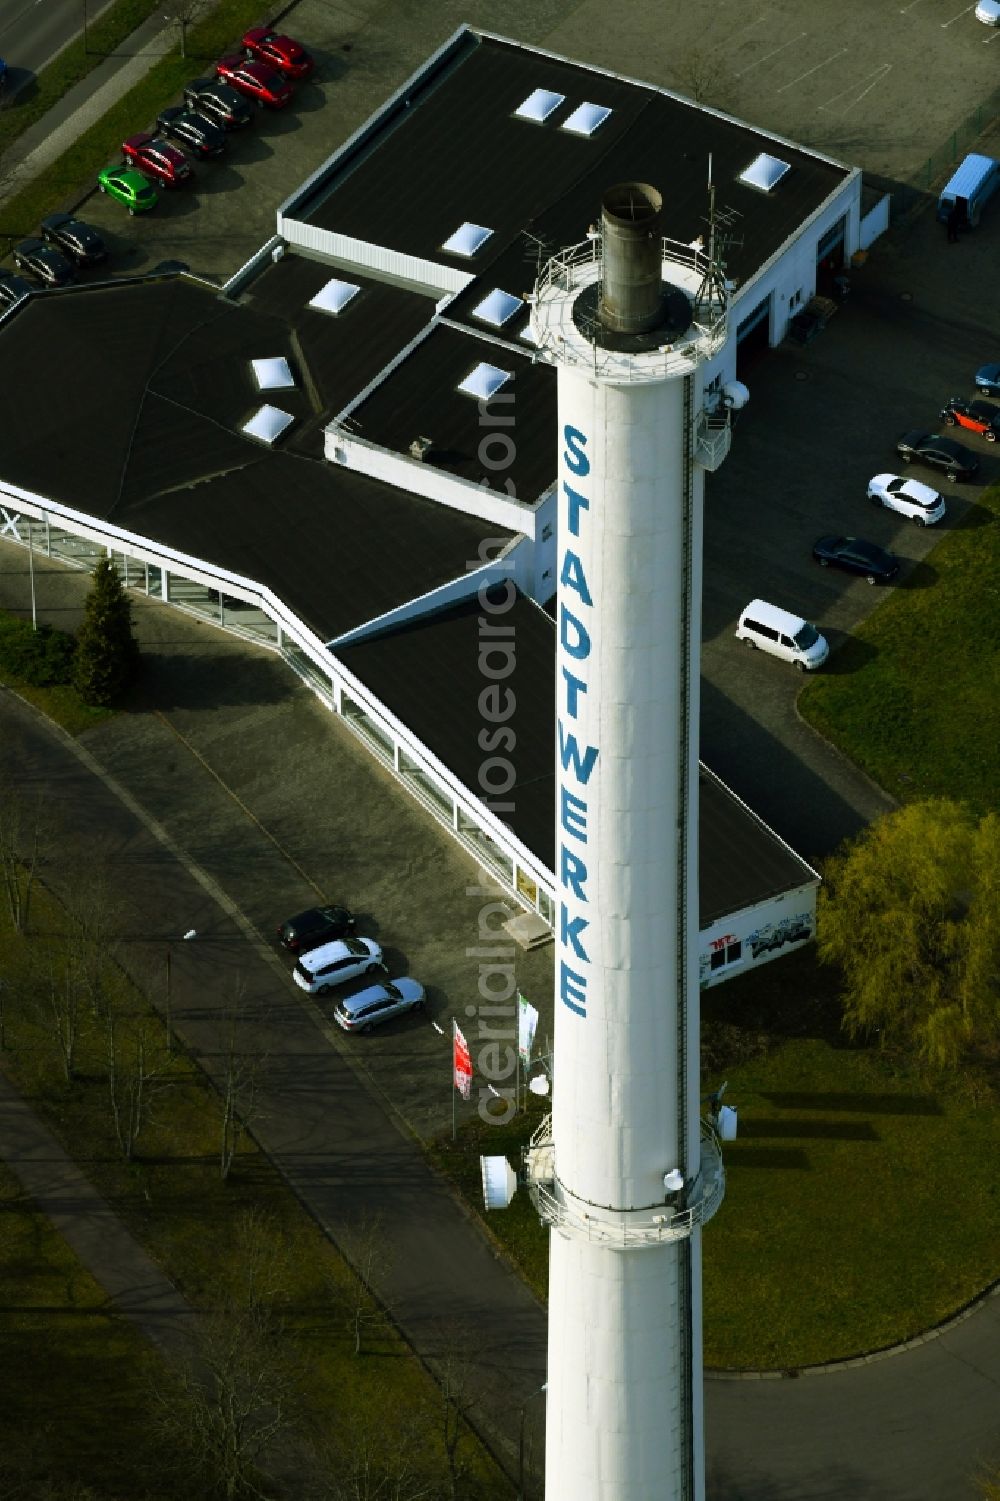 Bitterfeld-Wolfen from the bird's eye view: Chimney and building of the Stadtwerke Bitterfeld-Wolfen in the state Saxony-Anhalt, Germany